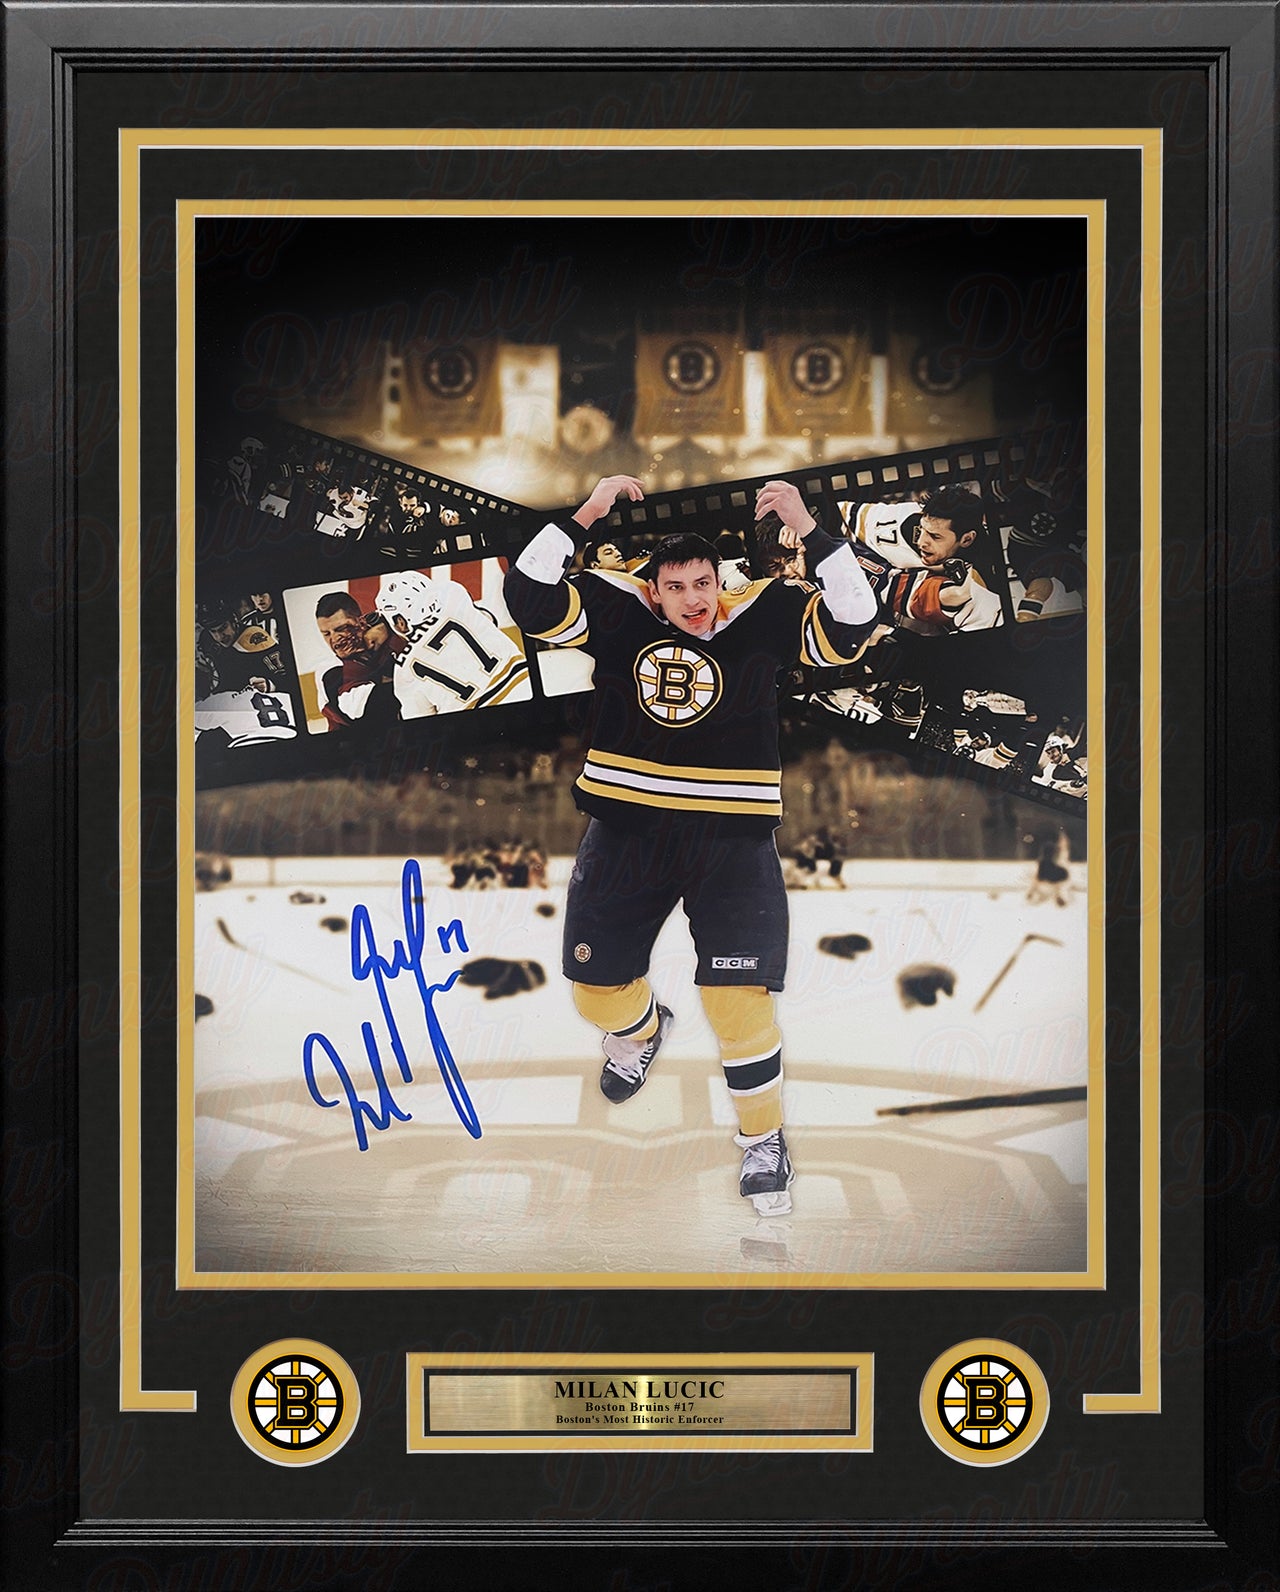 Milan Lucic Fight Collage Boston Bruins Autographed 16" x 20" Framed Hockey Photo